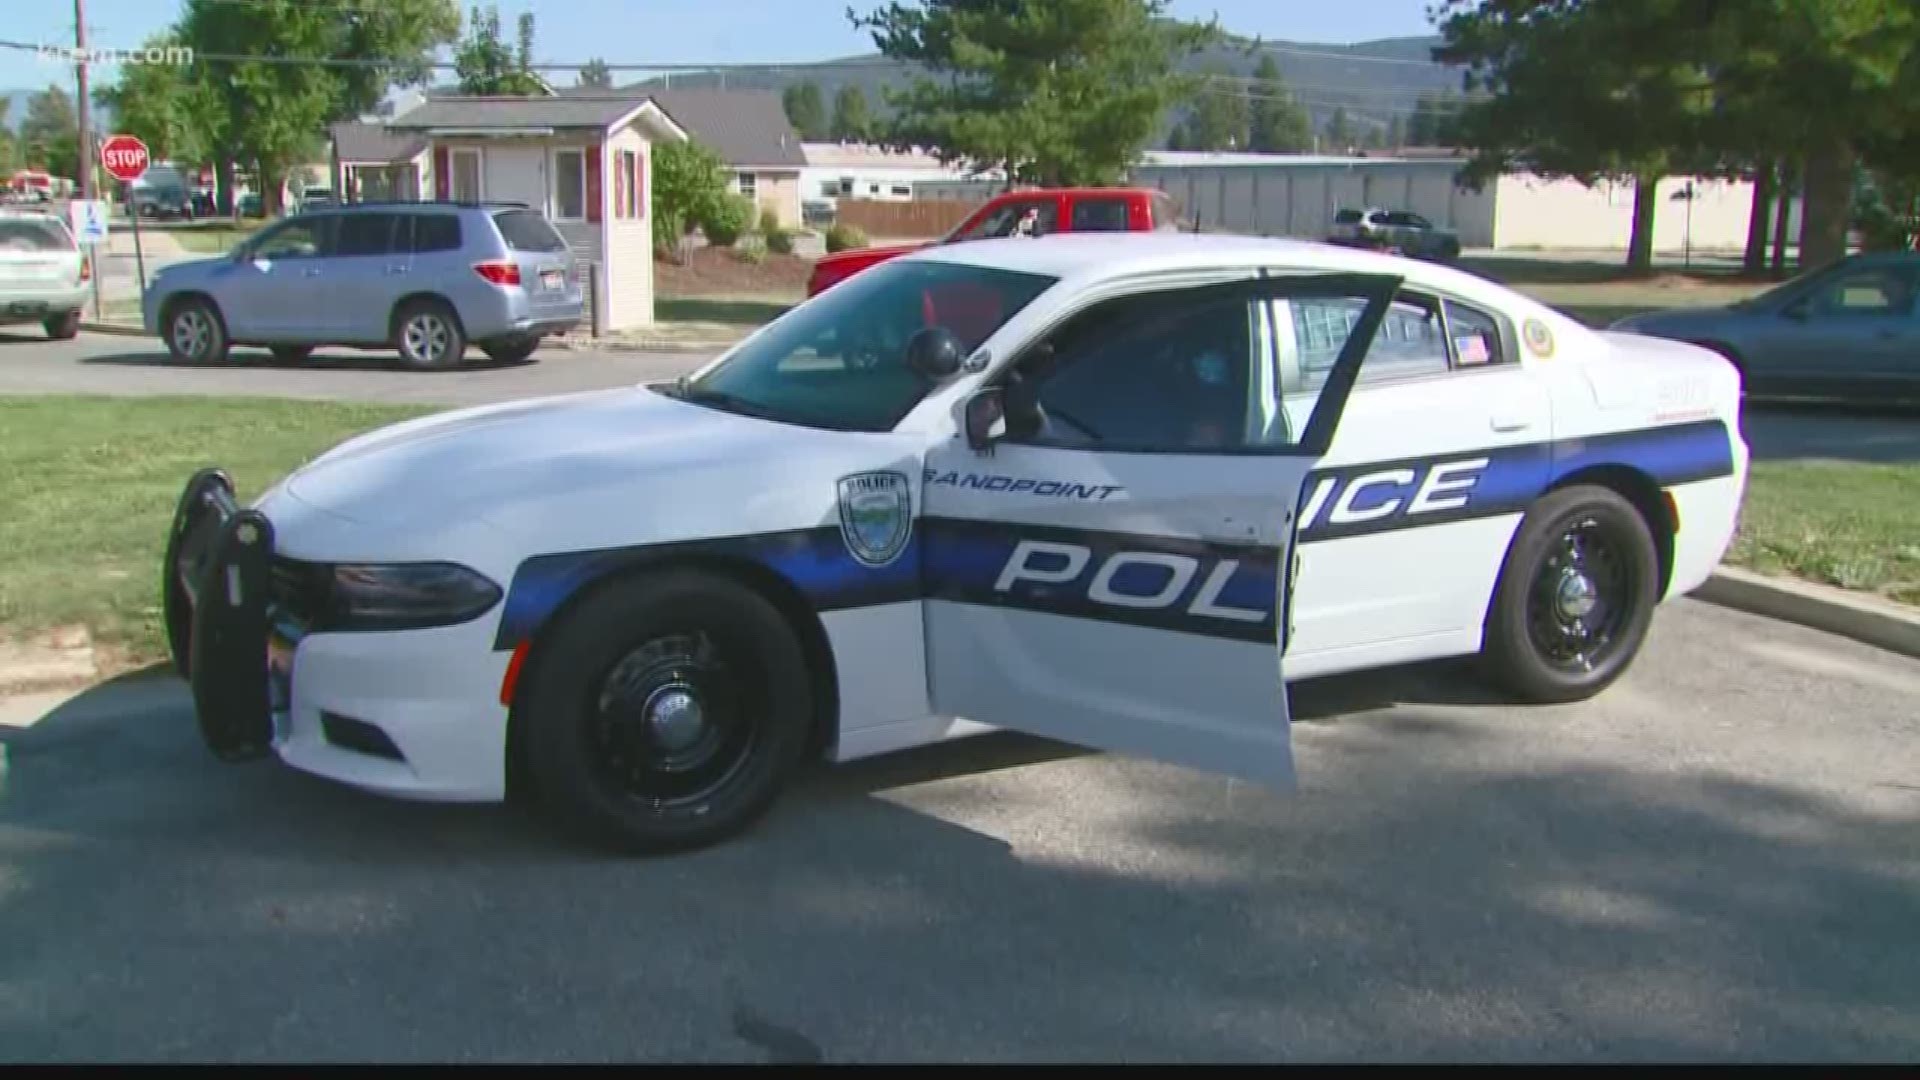 Schools in and around Sandpoint will have an extra school resource officer this year.